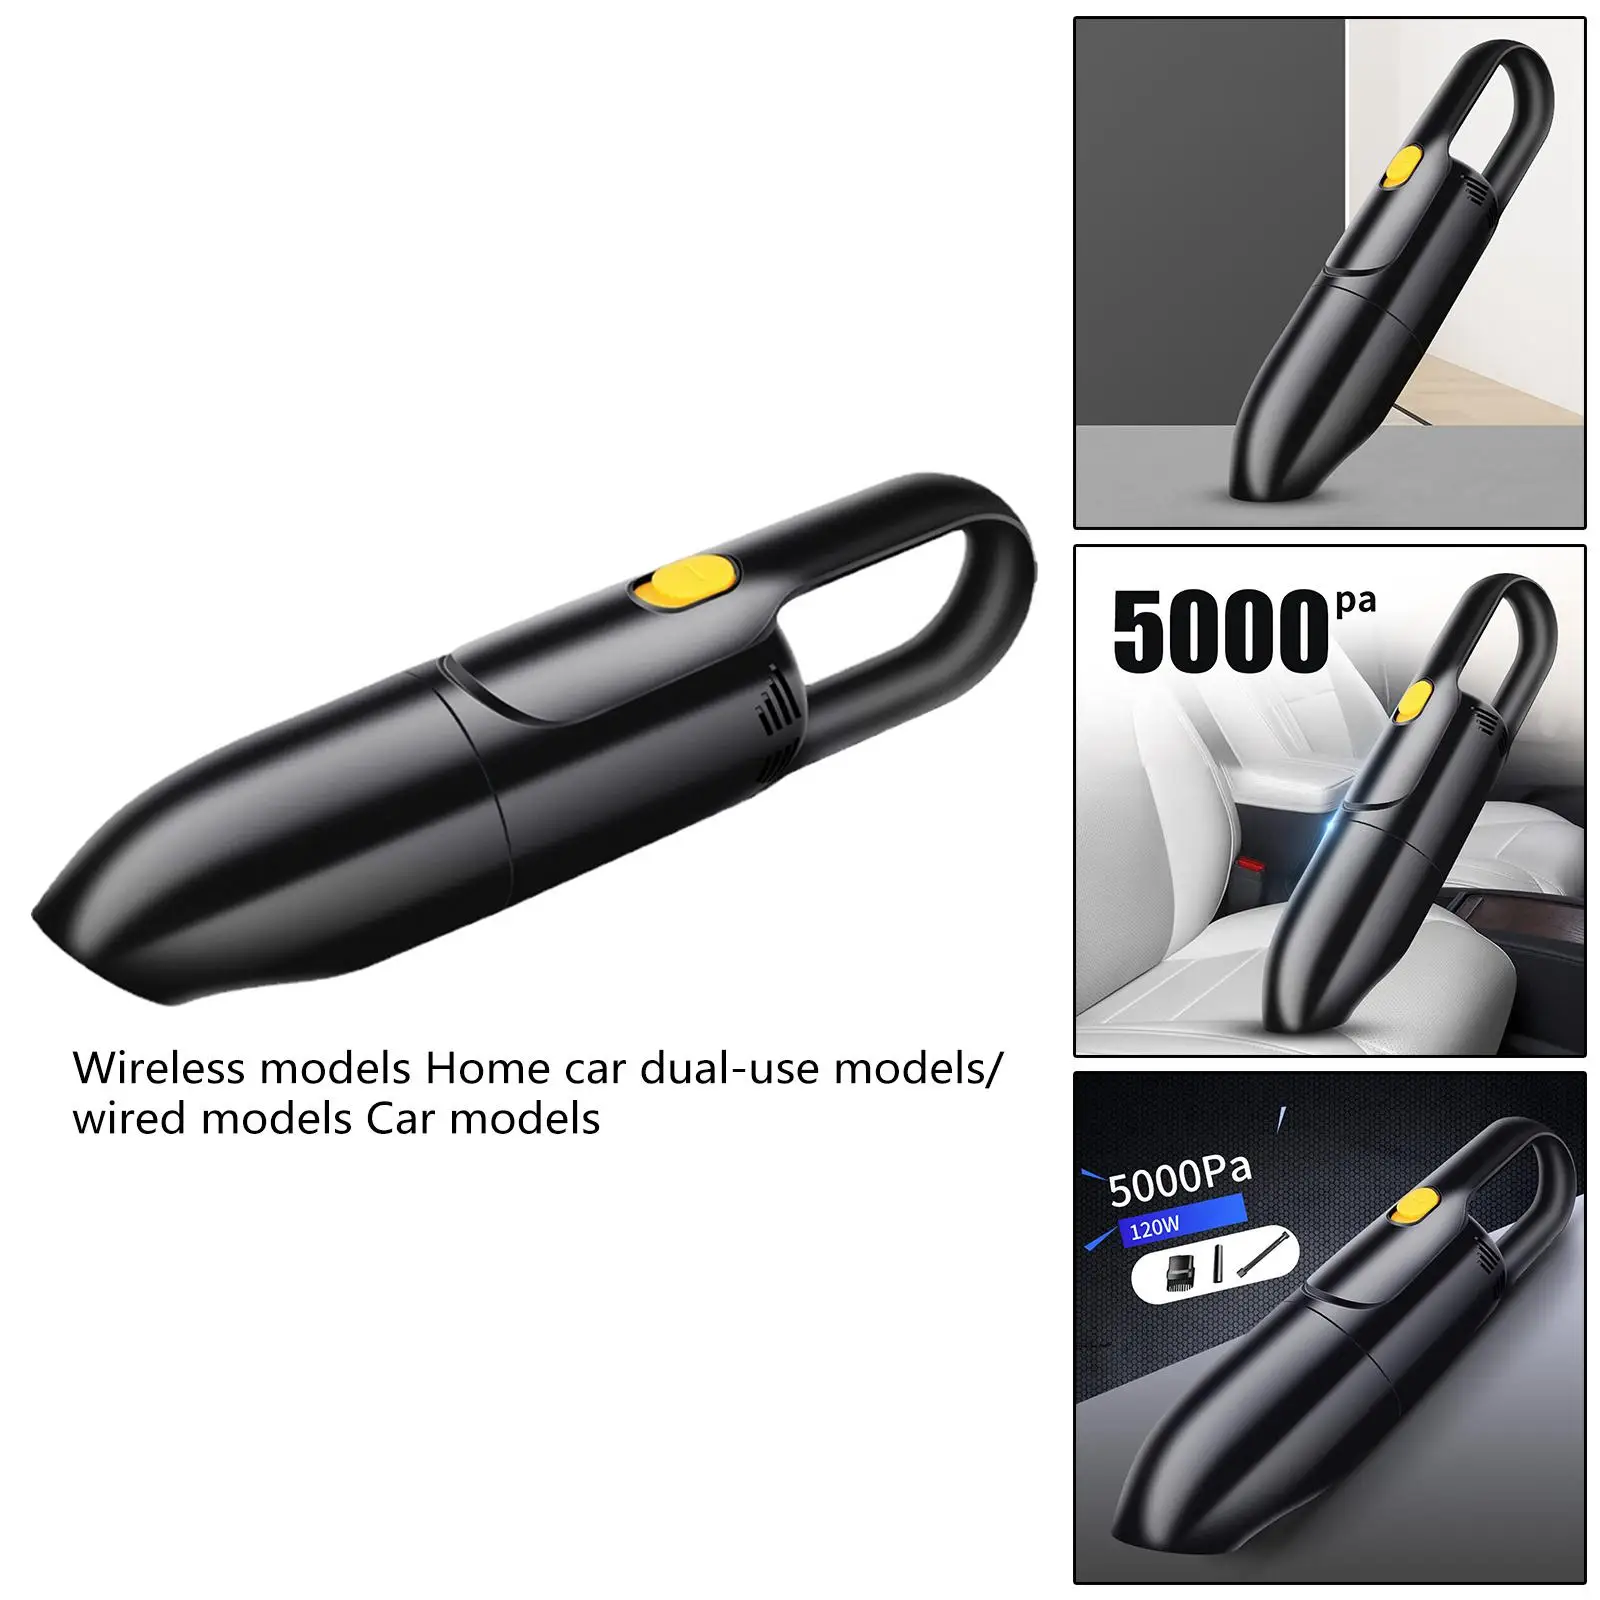 Handheld Mini Vacuum Cleaner Small 5000PA Powerful W/Strong Suction Car Vacuum Cleaner for Car Interior Cleaning Office